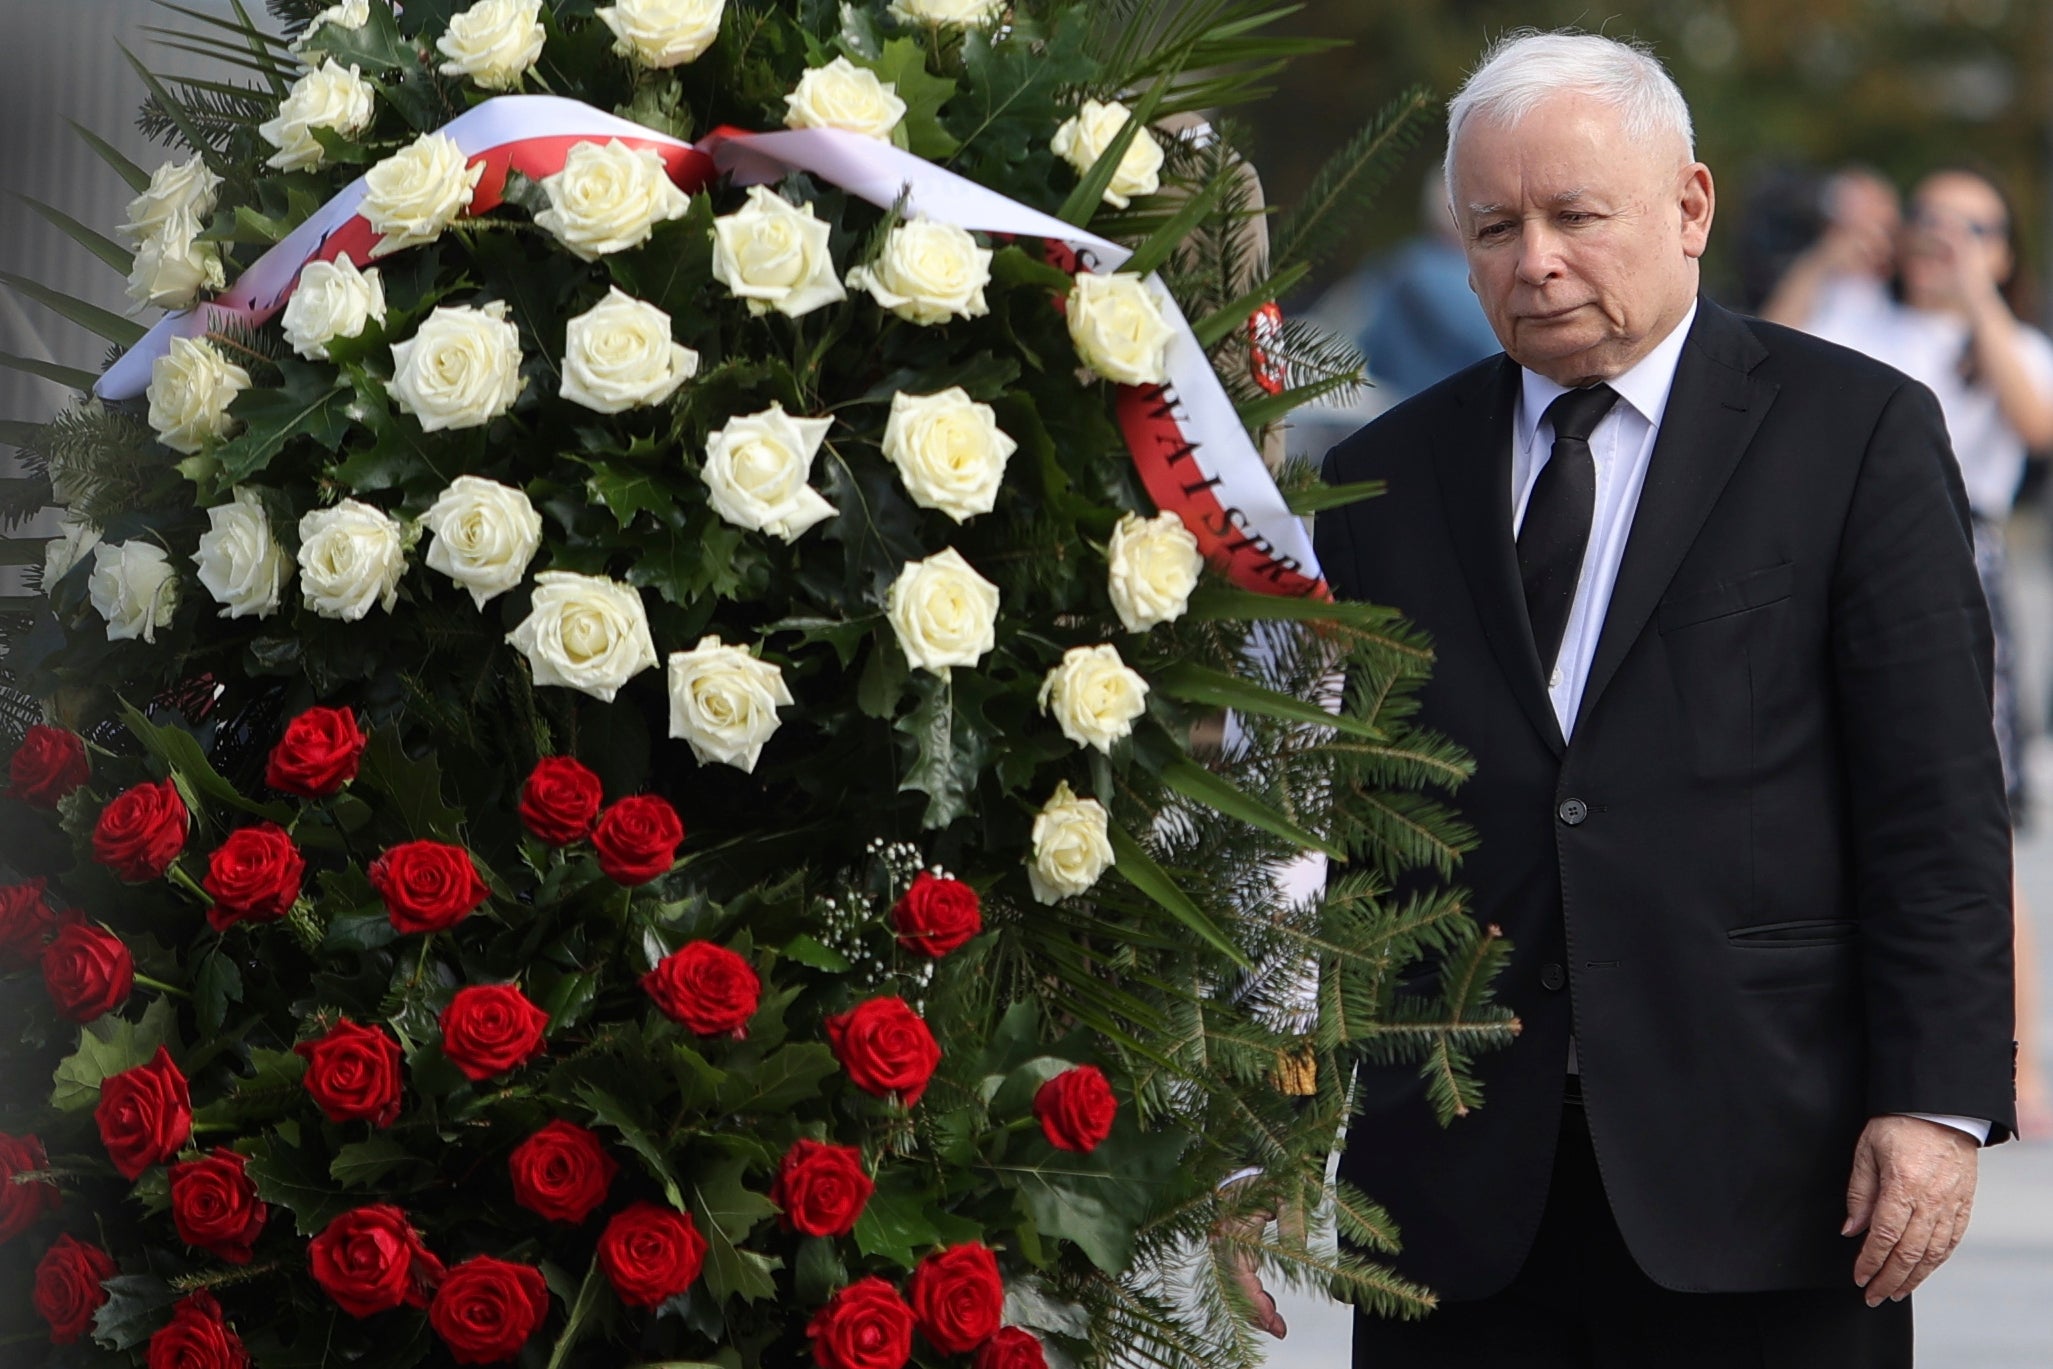 Kaczynski and party claim Poland’s opposition party is loyal to Berlin